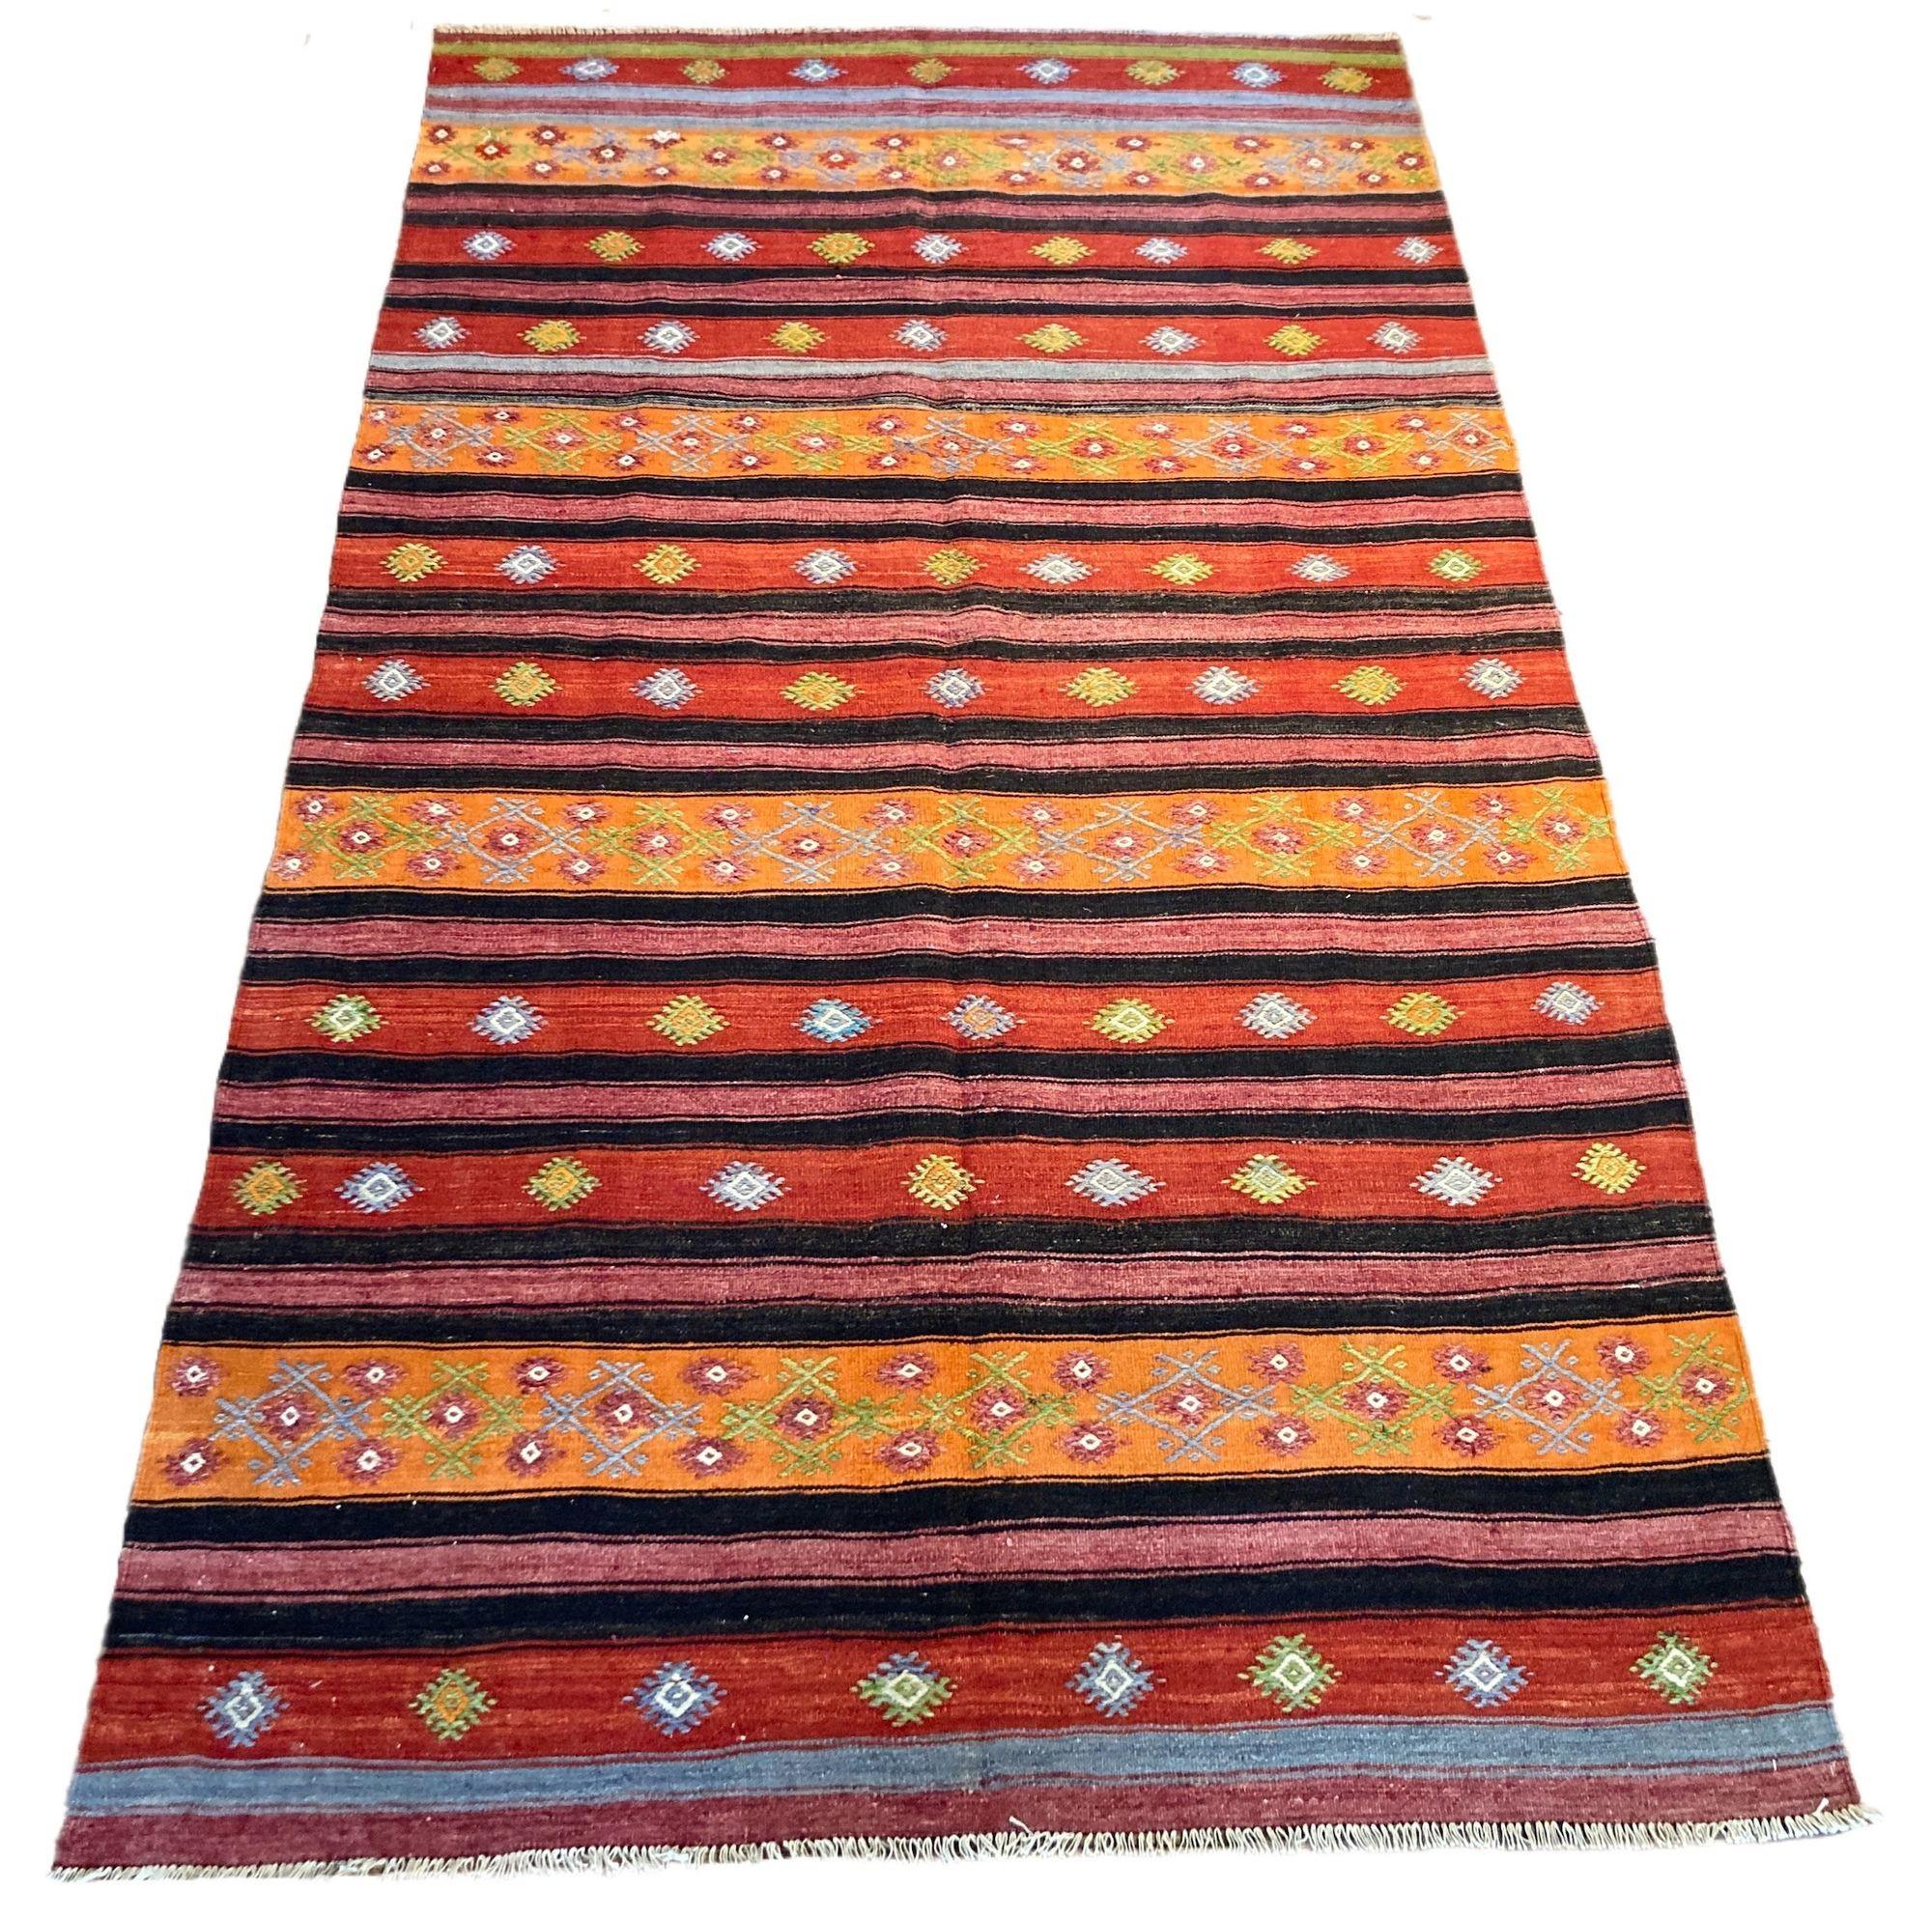 A beautiful vintage kilim, handwoven in central Turkey circa 1960 featuring a multicoloured banded design in red, orange, charcoal and blue.
Size: 3.03m x 1.70m (9ft11in x 5ft 7in)
This kilim is in good condition with light, age related wear. The